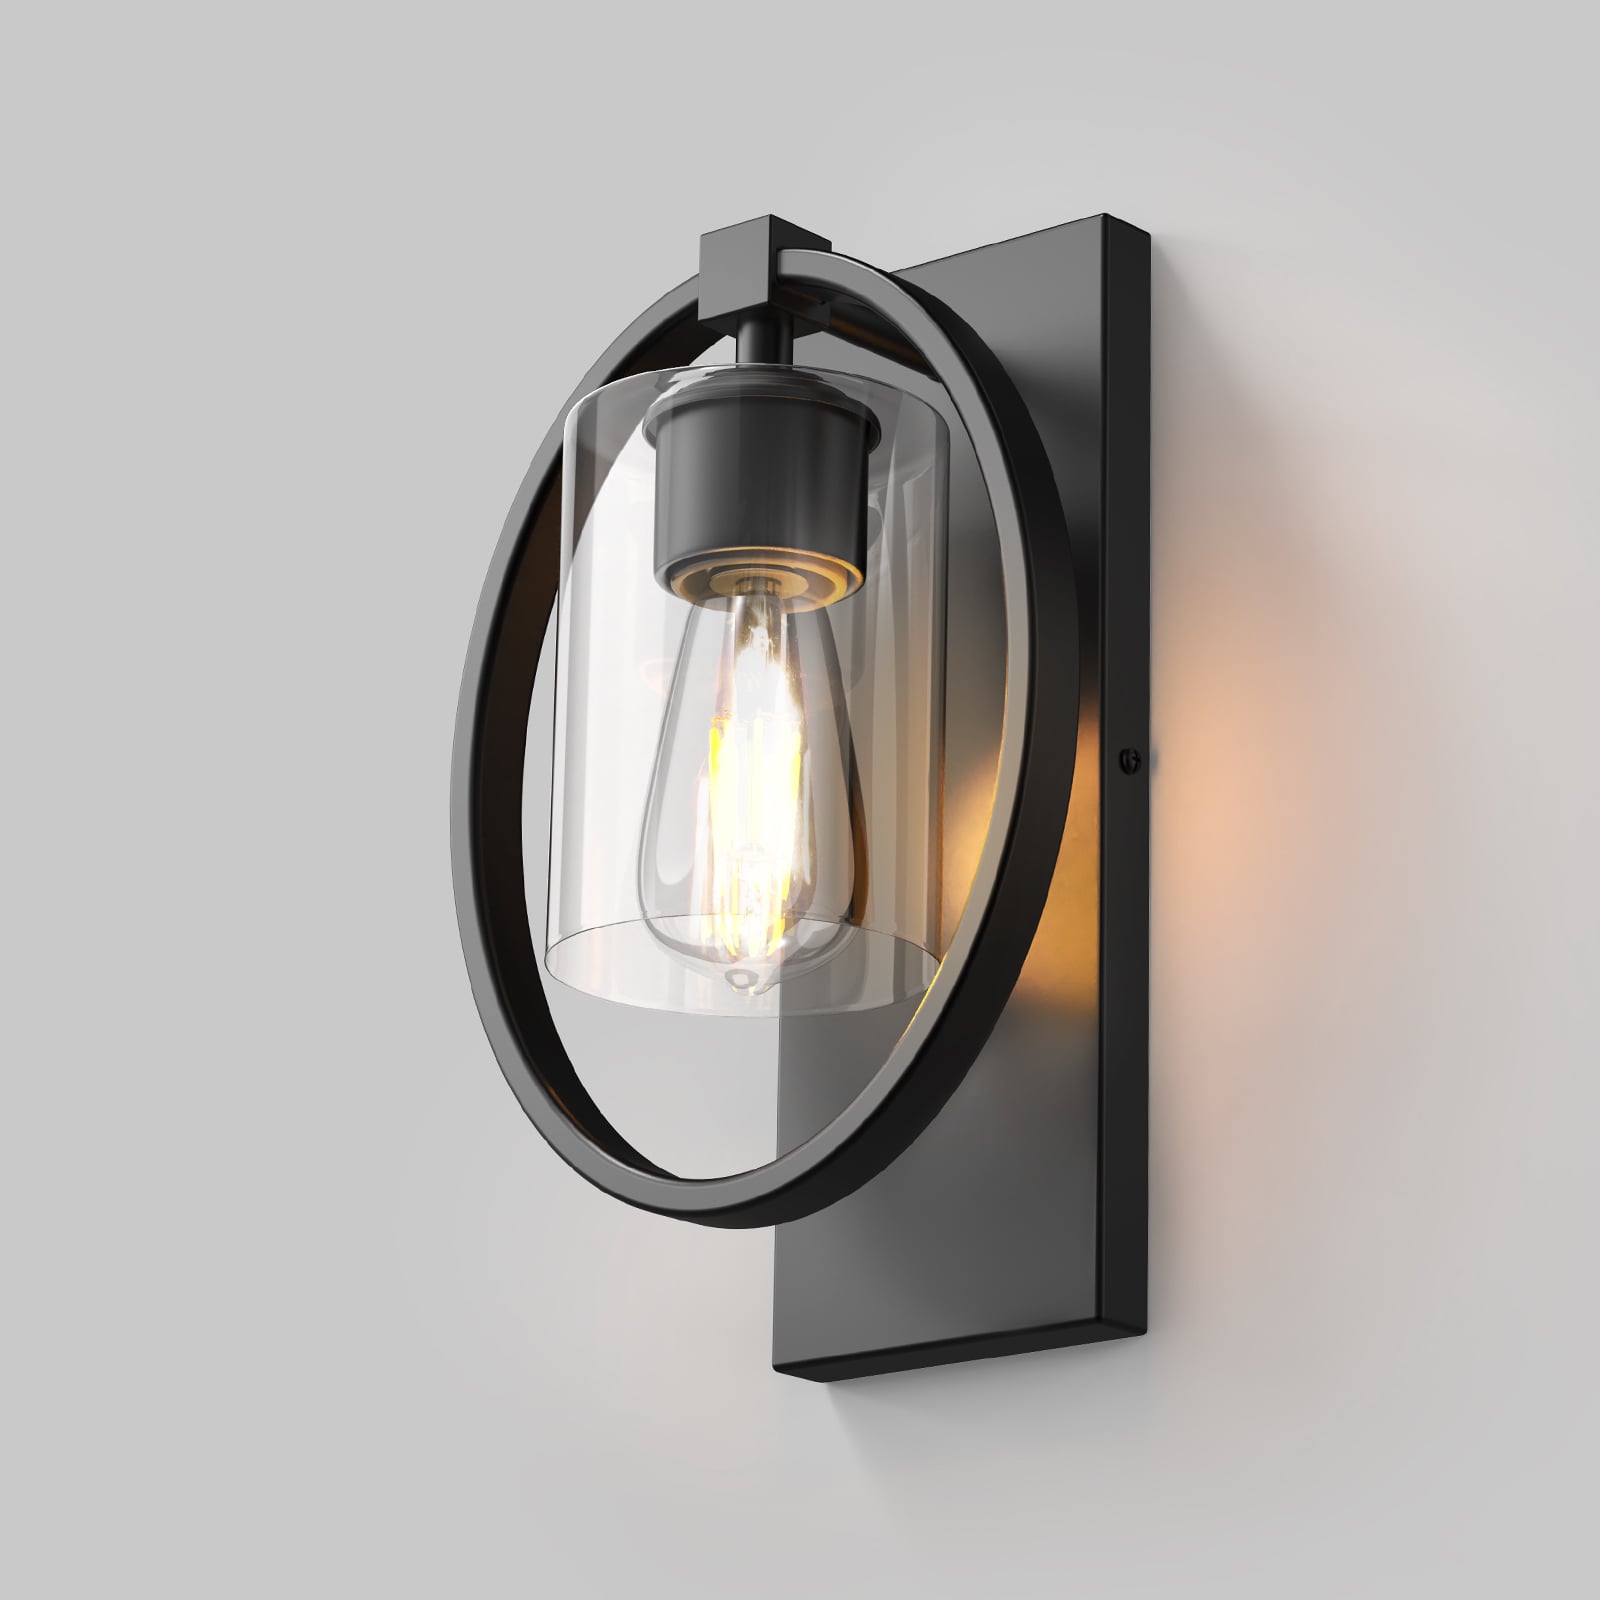 V02 Ring Wall Light Industrial Wall Sconce with Glass Lampshade for Hallway